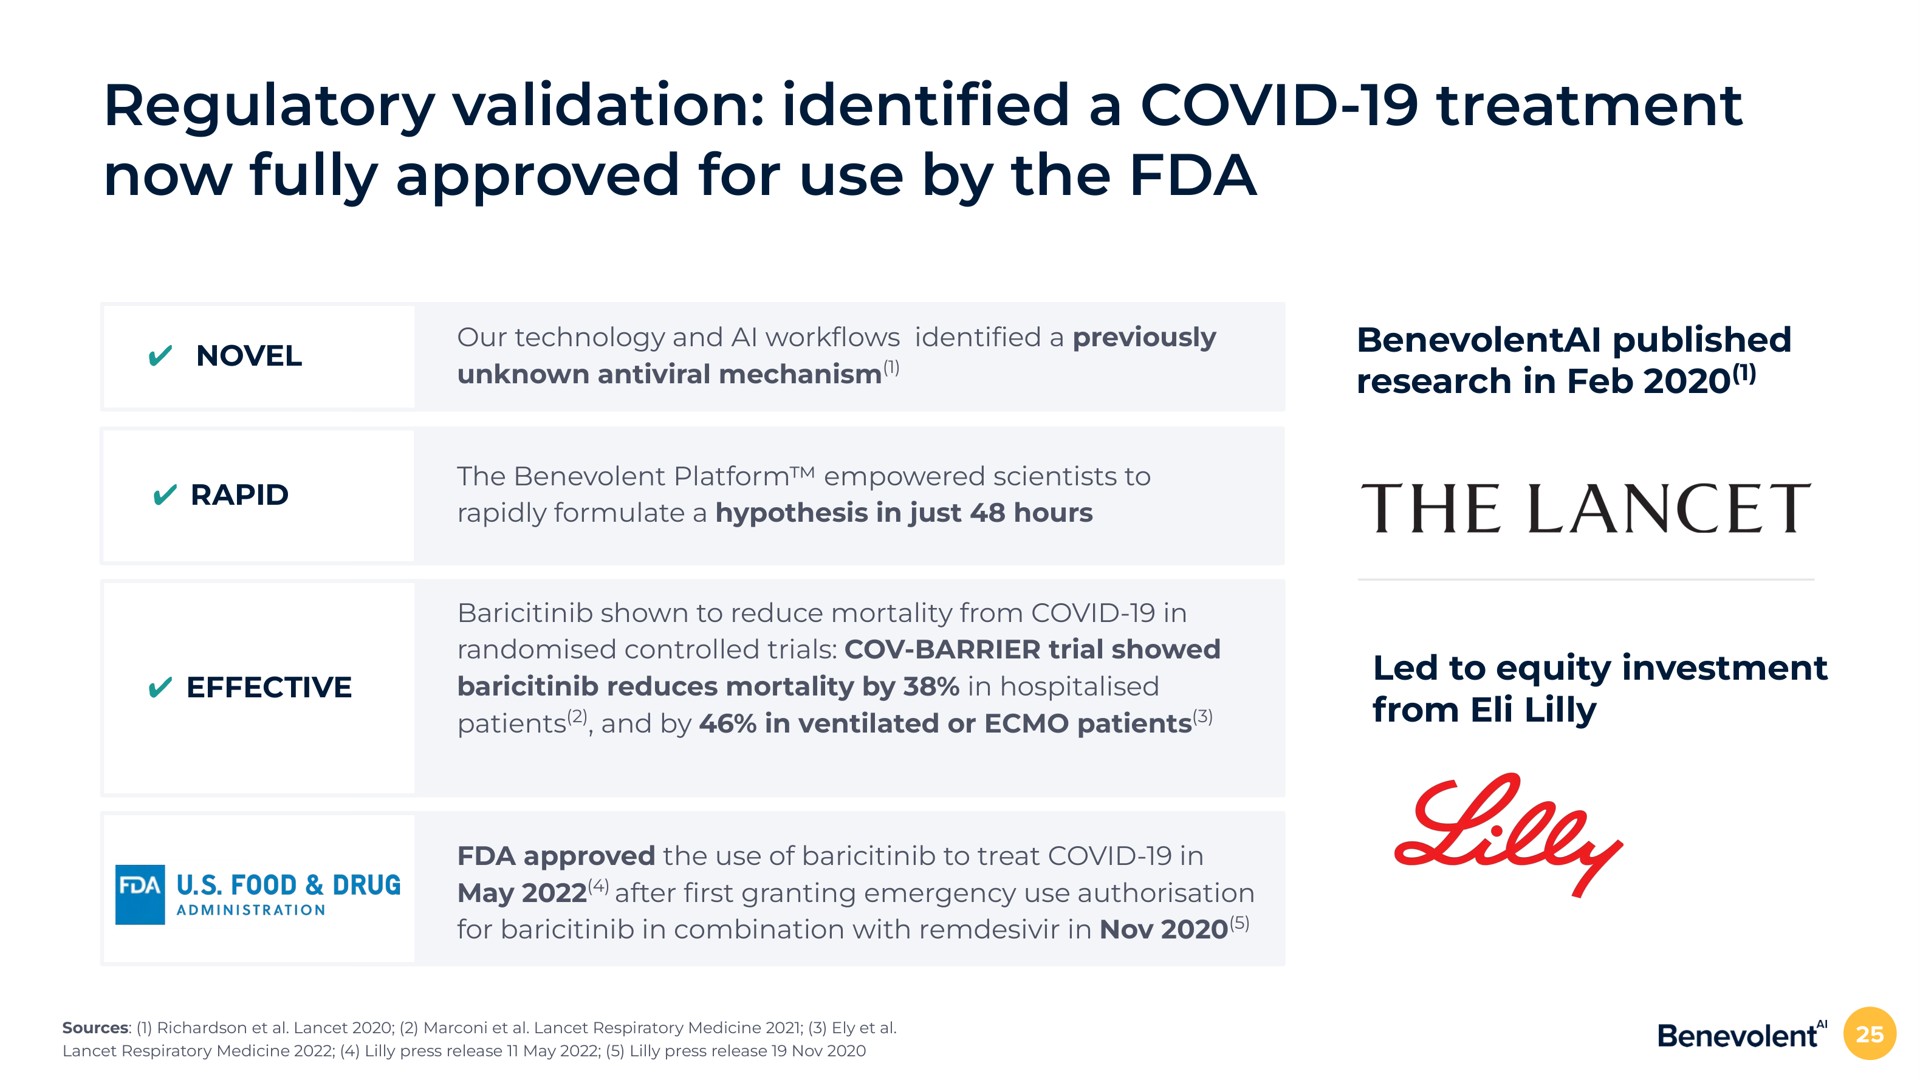 regulatory validation a covid treatment now fully approved for use by the novel our technology and work a previously unknown antiviral mechanism published research in rapid the benevolent platform empowered scientists to rapidly formulate a hypothesis in just hours effective shown to reduce mortality from covid in controlled trials barrier trial showed reduces mortality by in patients and by in ventilated or patients led to equity investment from approved the use of to treat covid in may after granting emergency use for in combination with in identified lancet | BenevolentAI